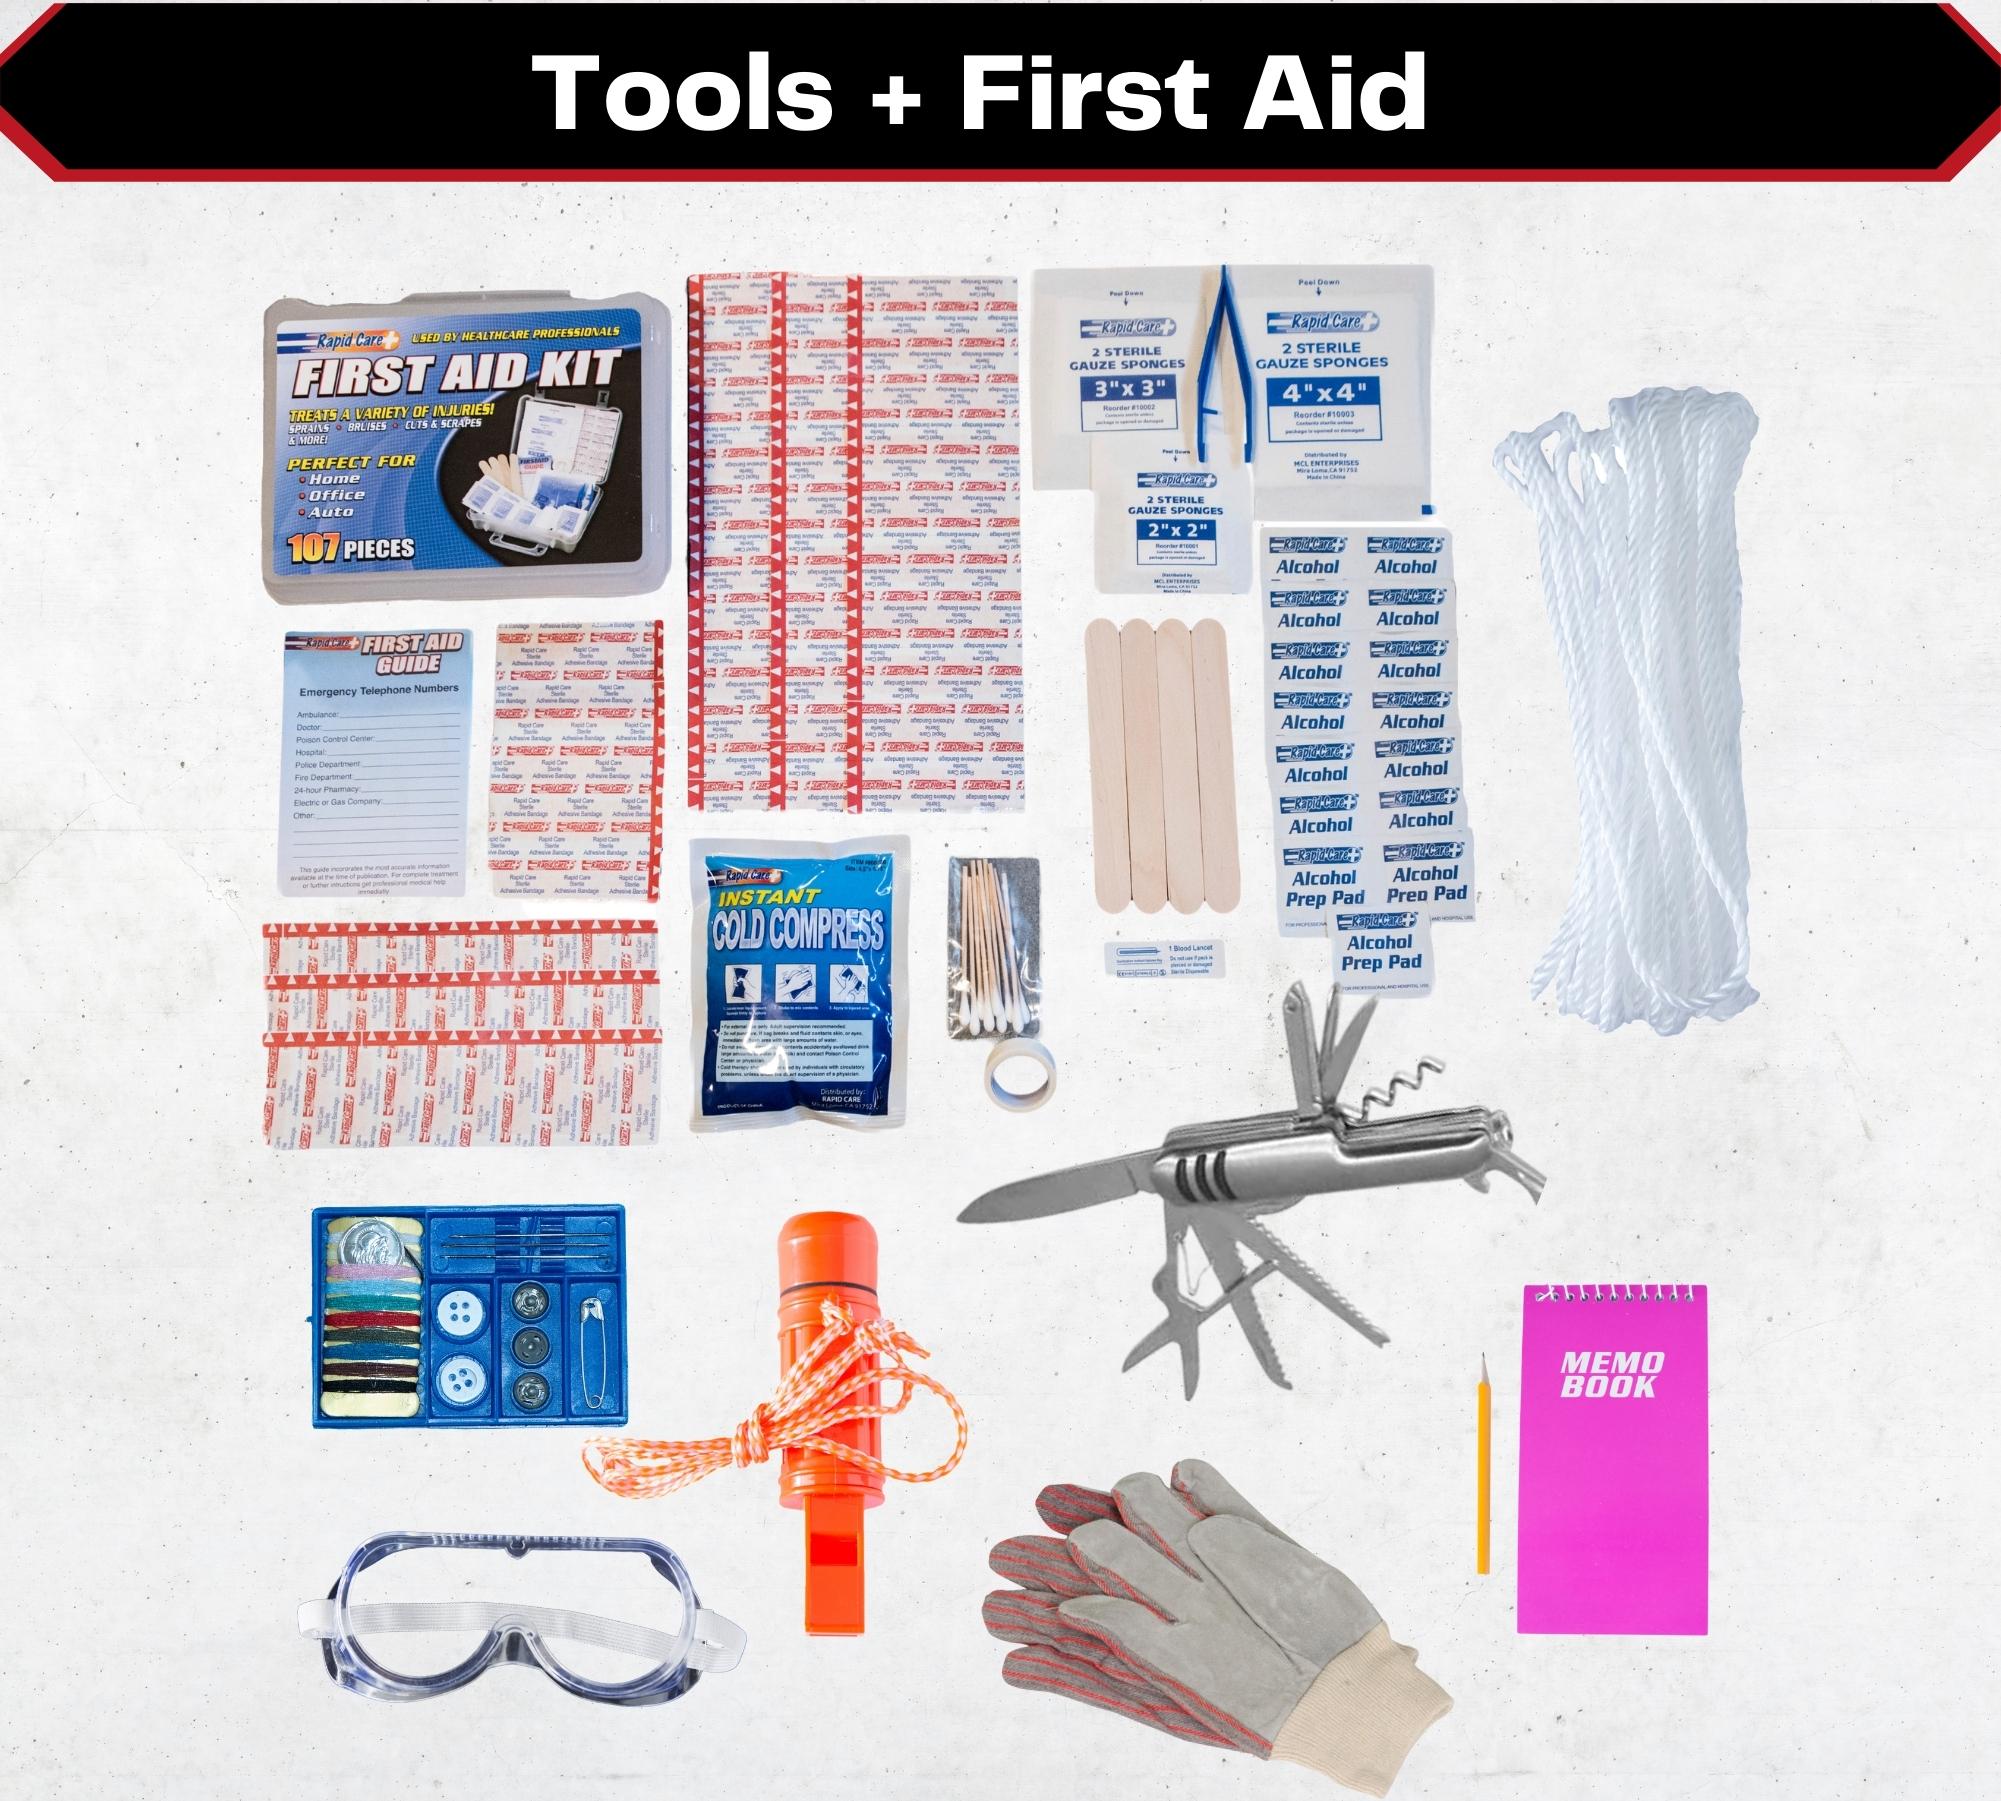 Go Bags Survival Kit Tools and First Aid - Be Ready Bags